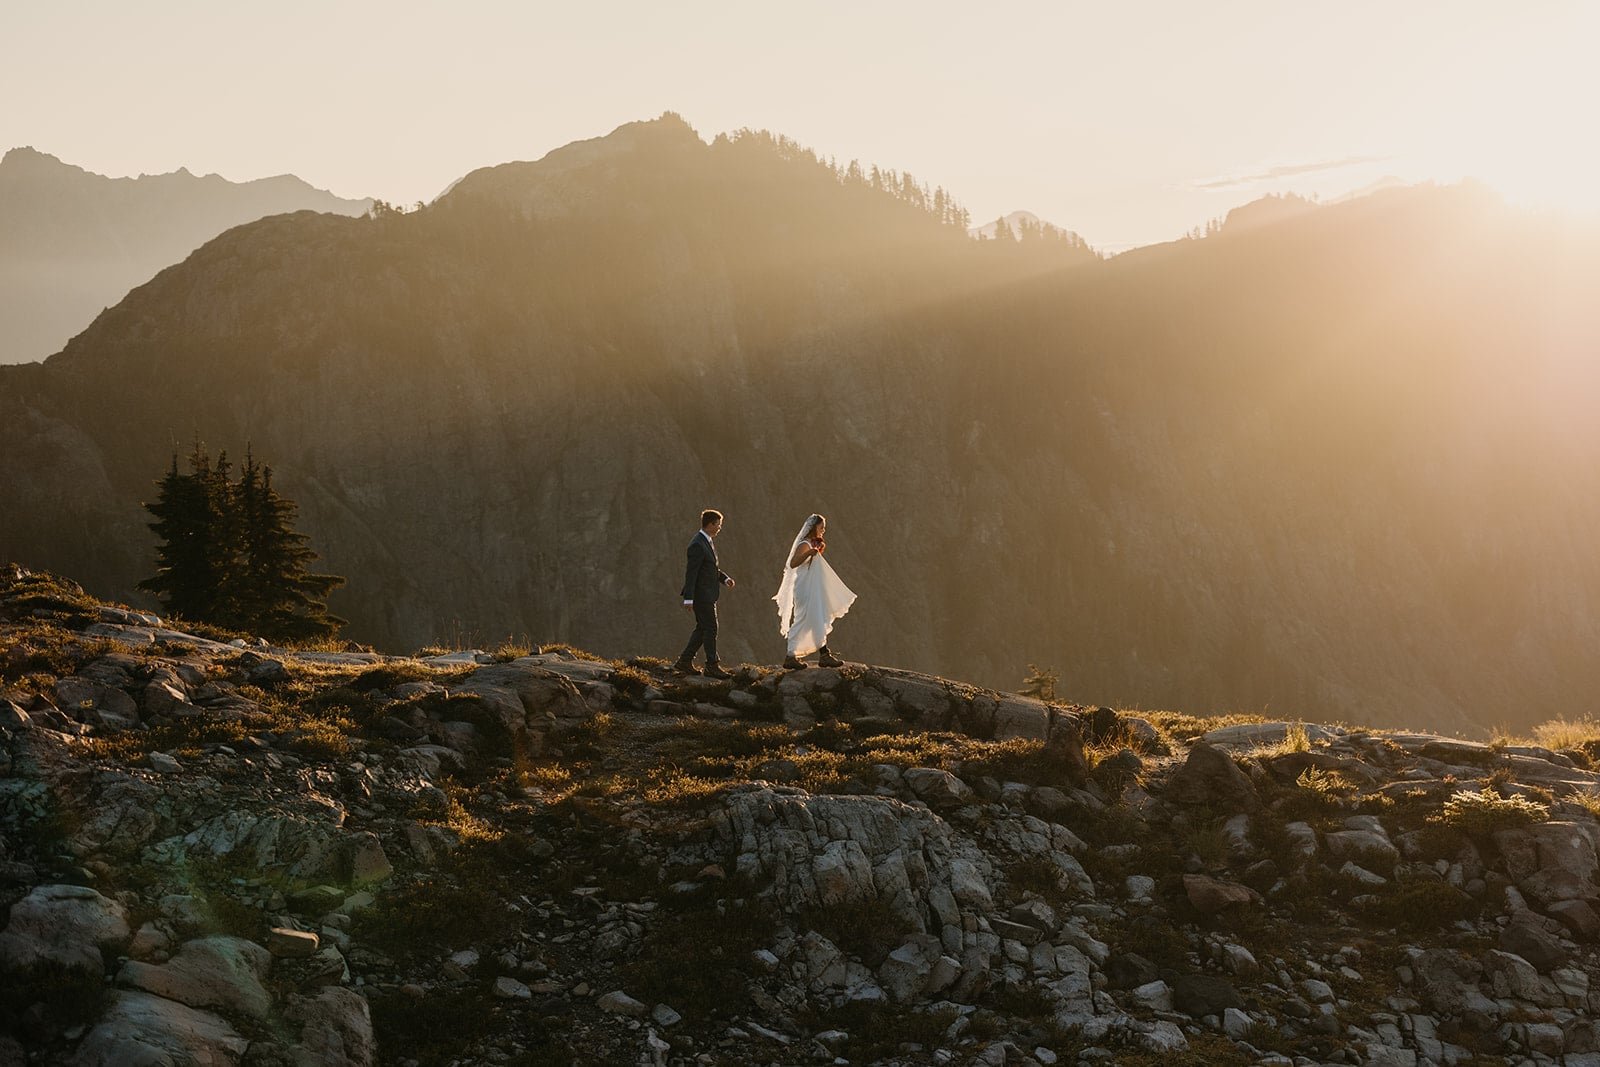 The bride and groom hike in the morning sunrise light.